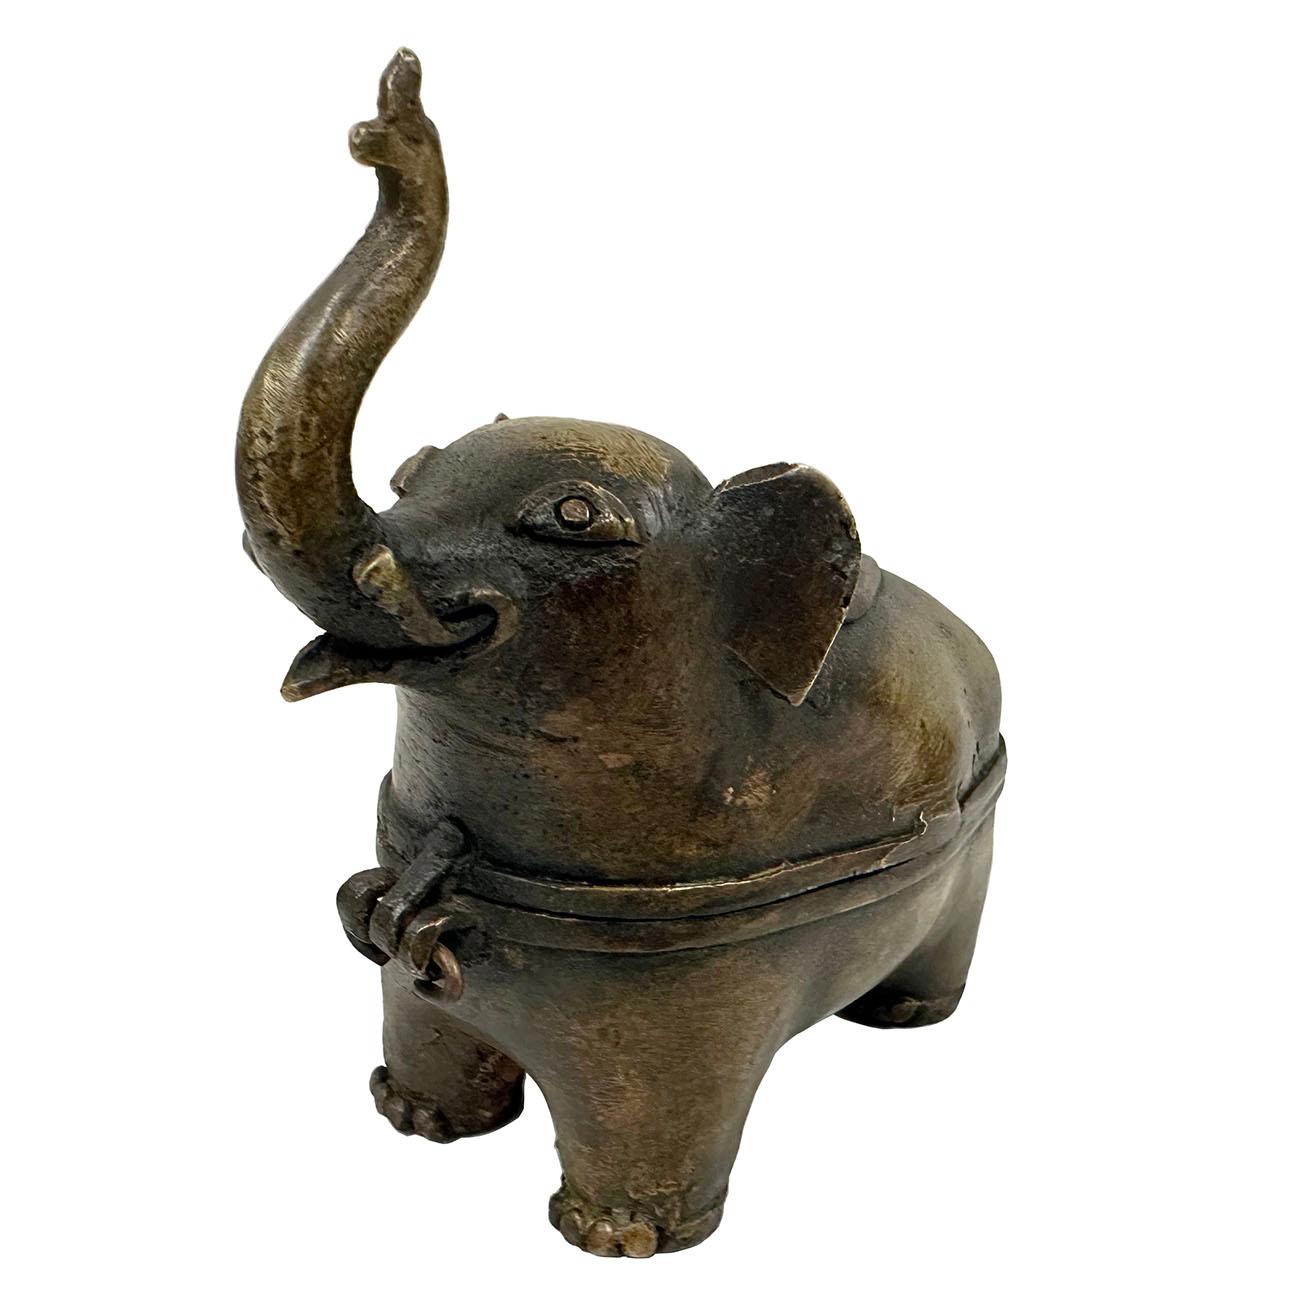 Up for sell is a magnificent Chinese antique carved bronze incense burner. It shows very detailed hand carving works of Elephant style incense burner with lid. You can see from the pictures that there are a lot of carving works all over the incense